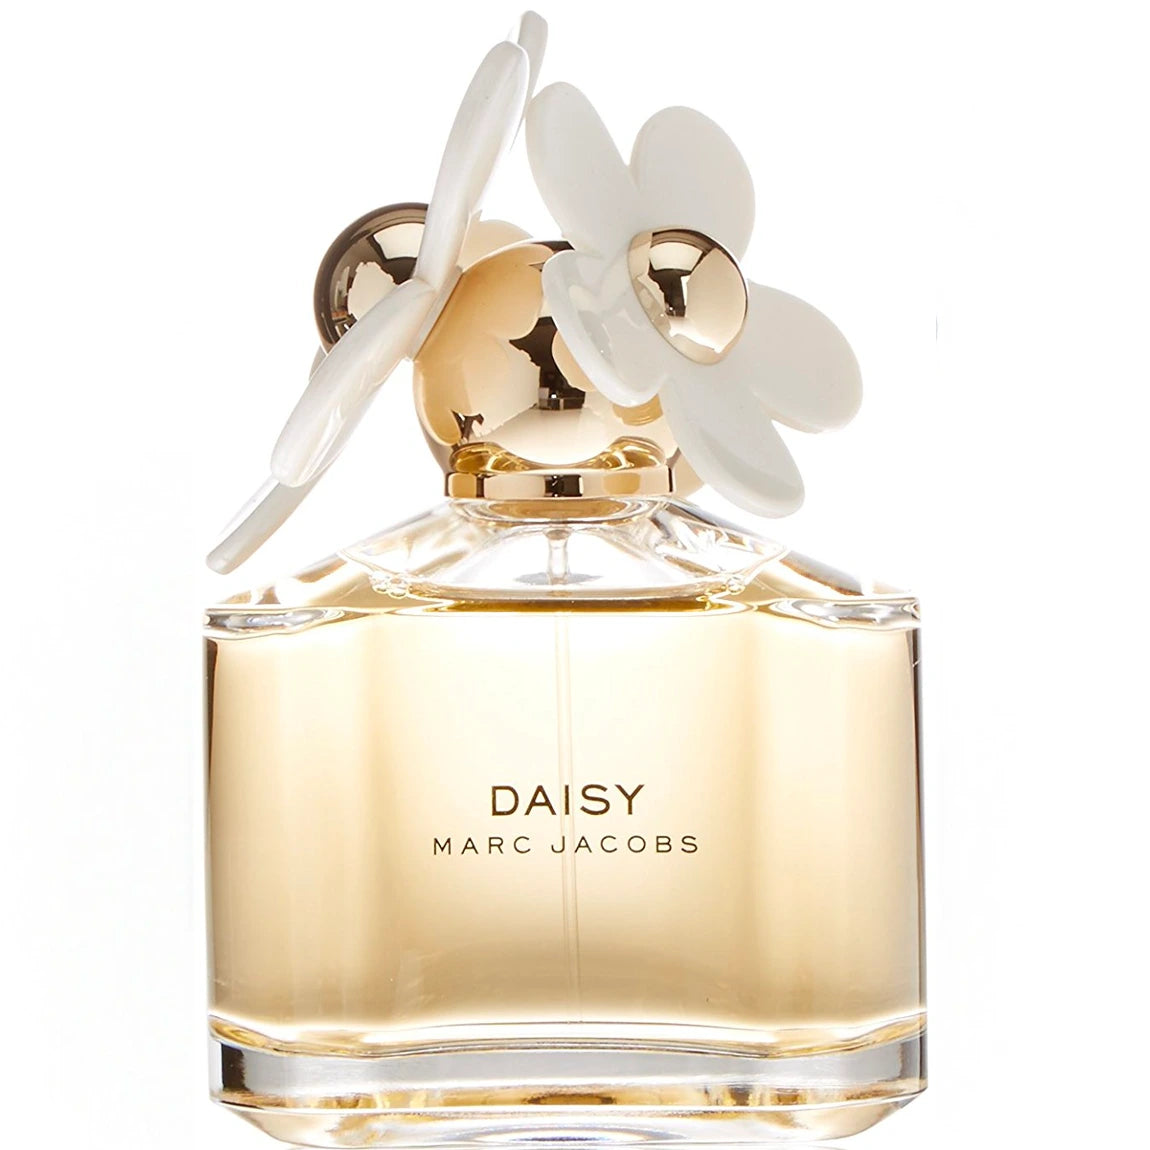 Daisy by Marc Jacobs - LaBelle Perfumes